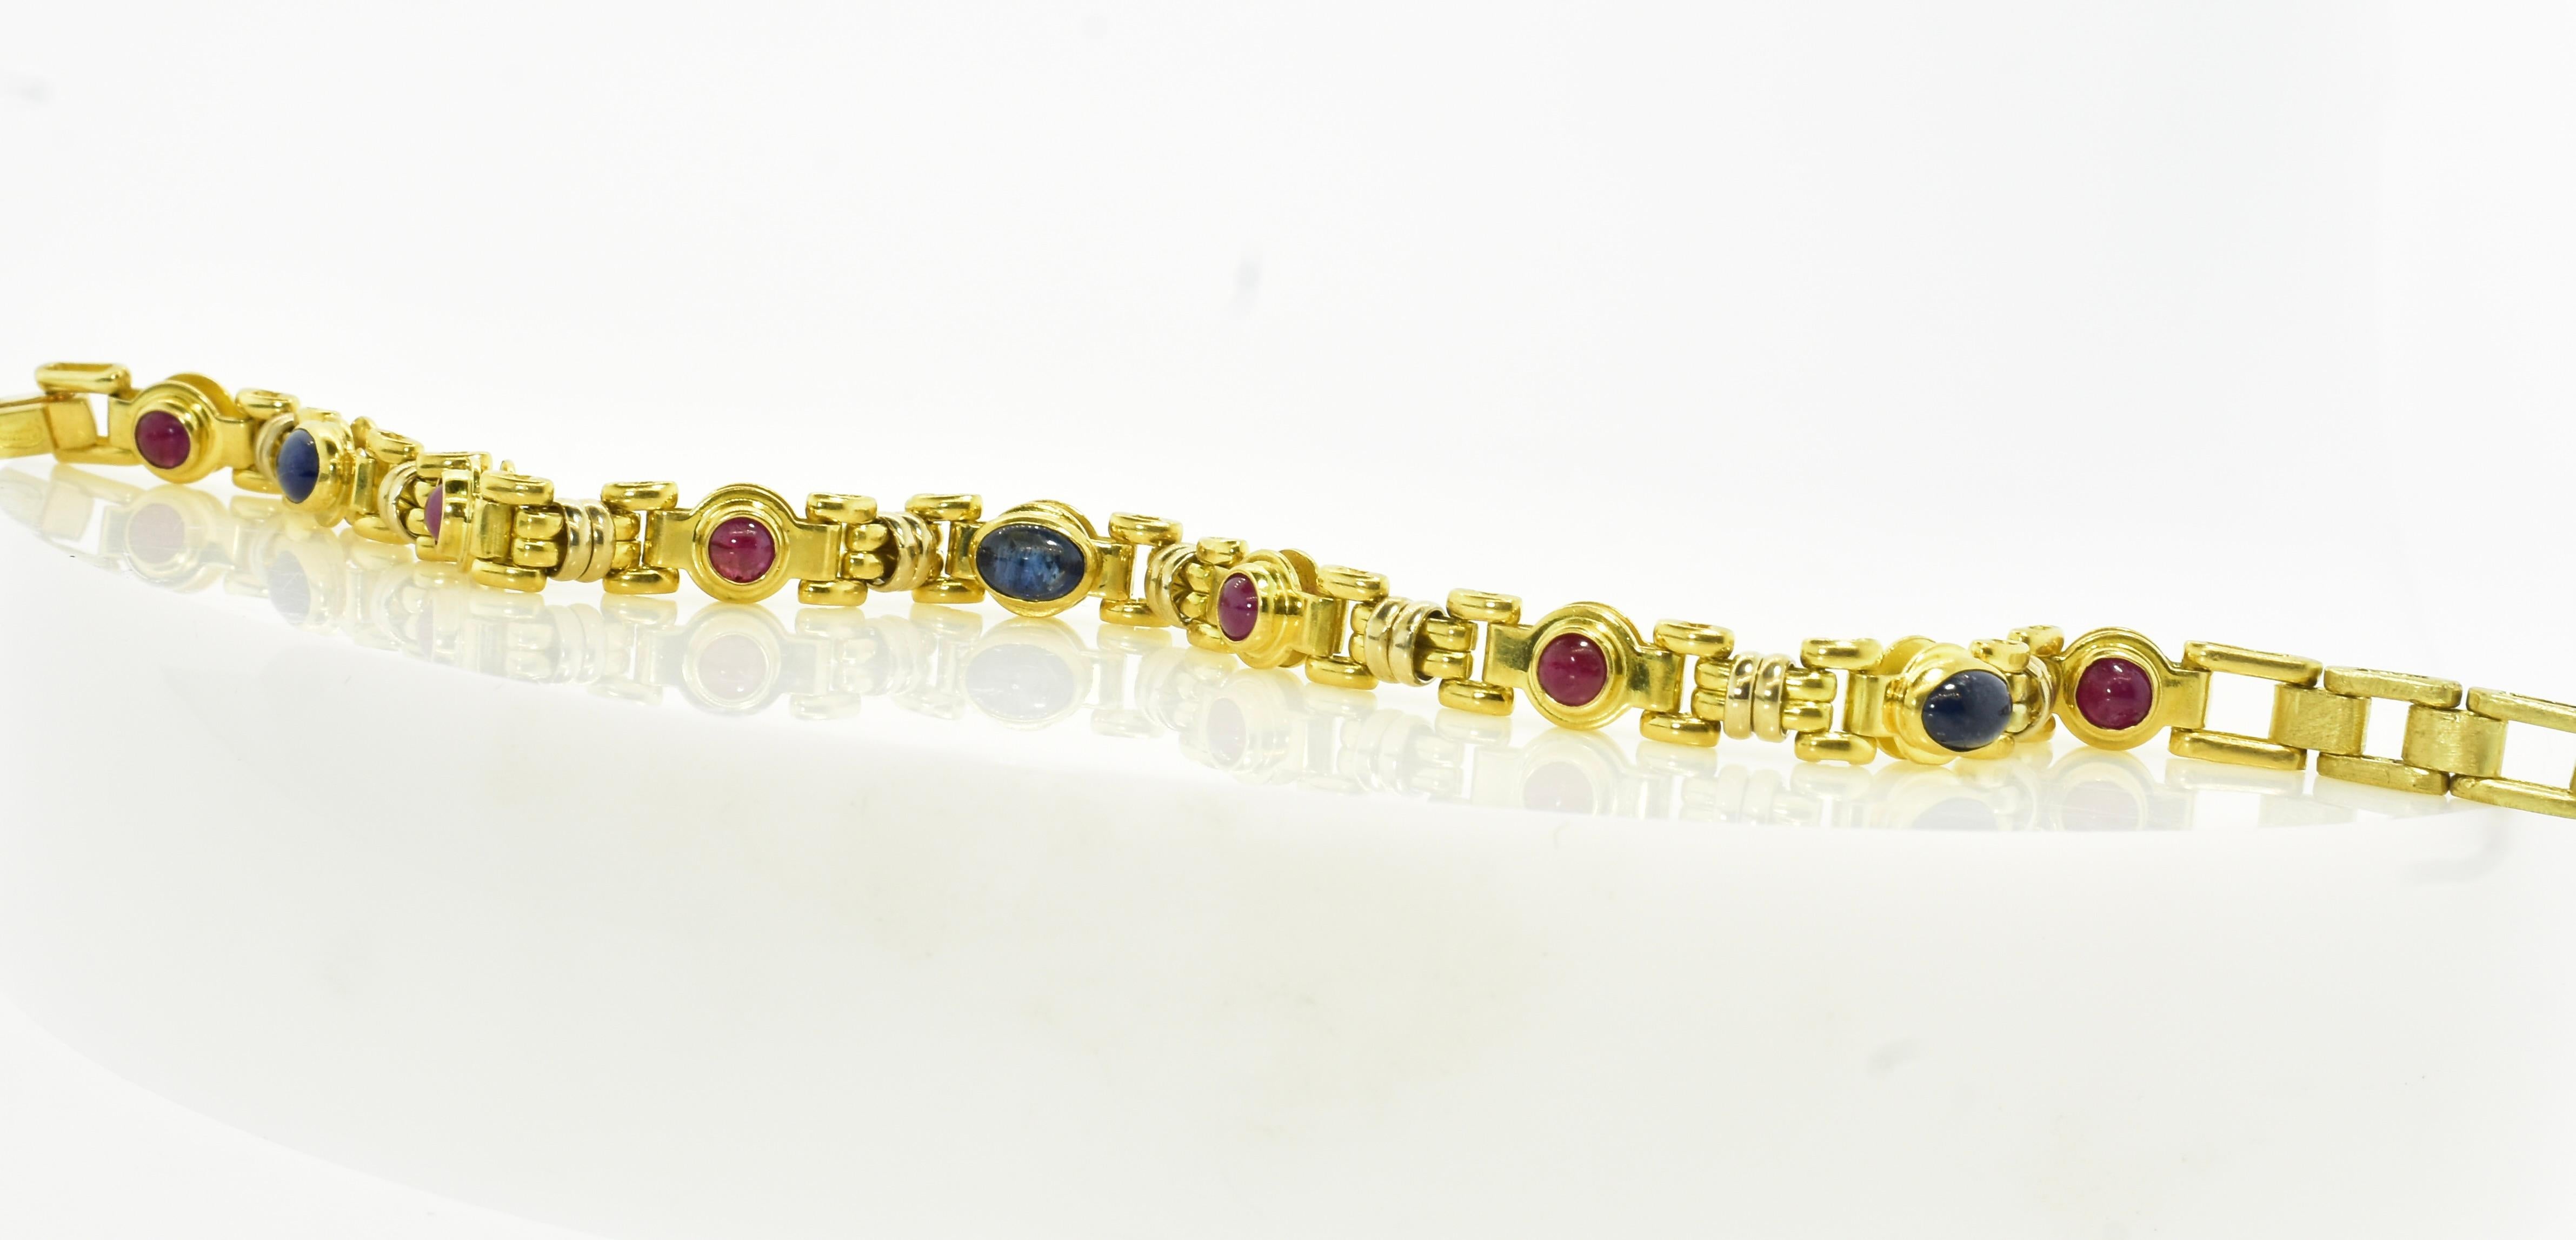 18K Bracelet with Sapphires and Rubies, Flexible and Unusual Complex Link. For Sale 1